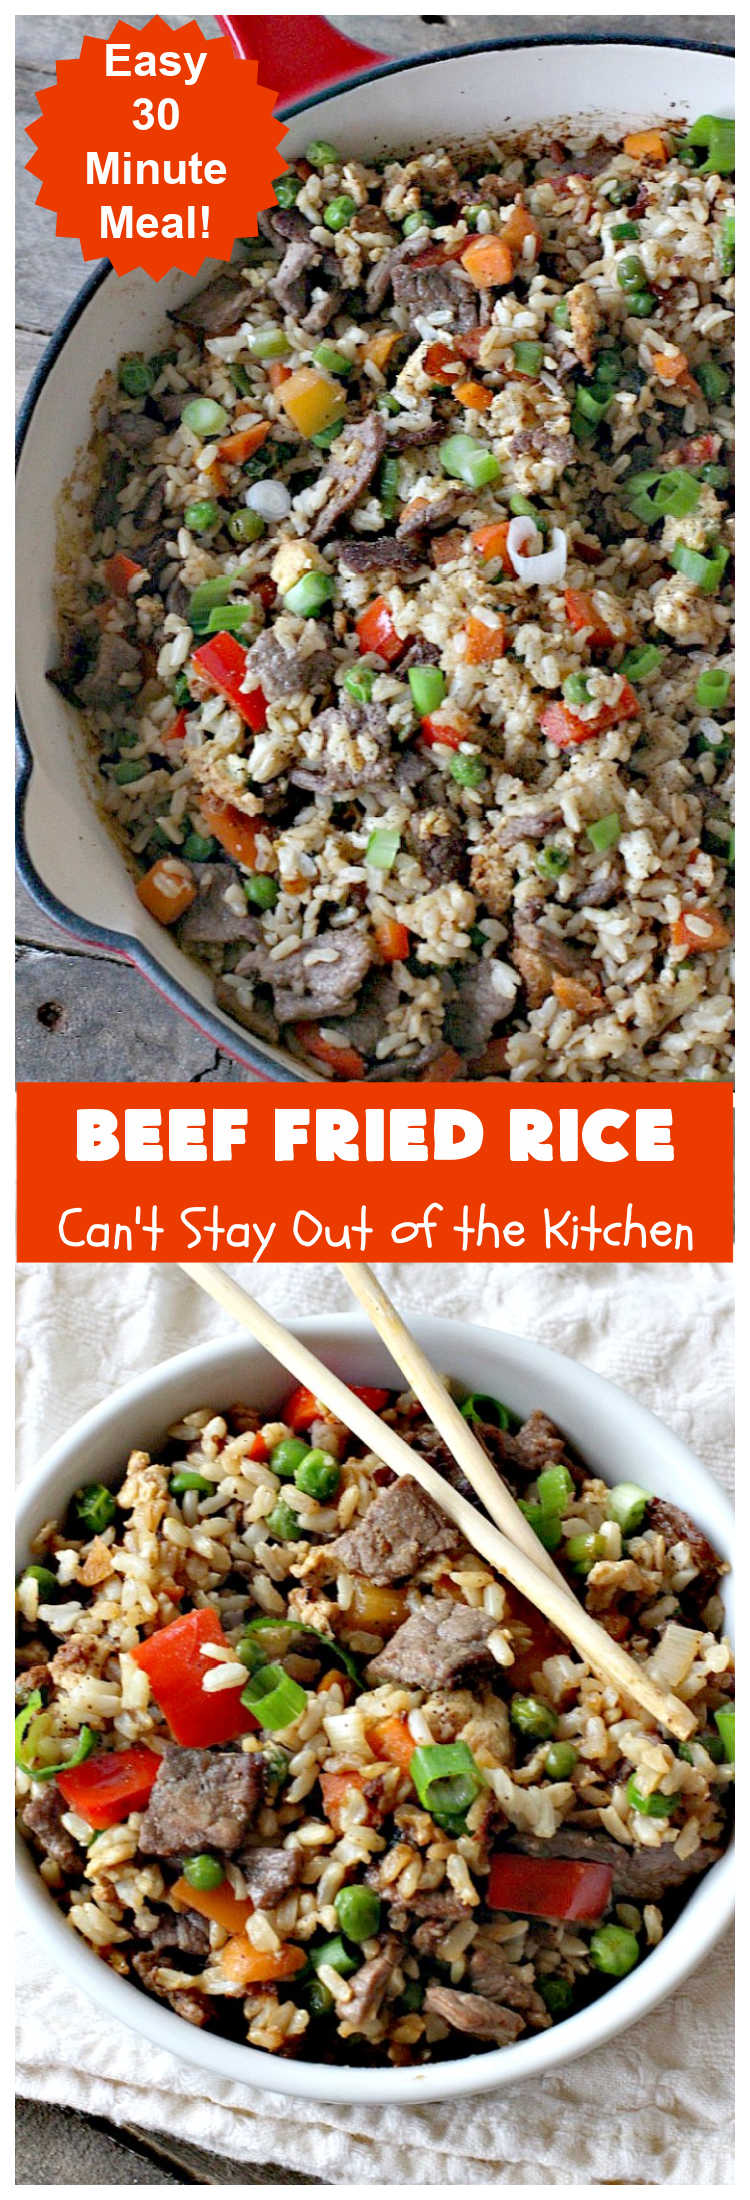 Beef Fried Rice | Can ' t Stay Out of the Kitchen / easy 30 minute meal! fabulous #FriedRice with #beef lots of #veggies. Täydellinen # FreezerMeals. #BeefFriedRice